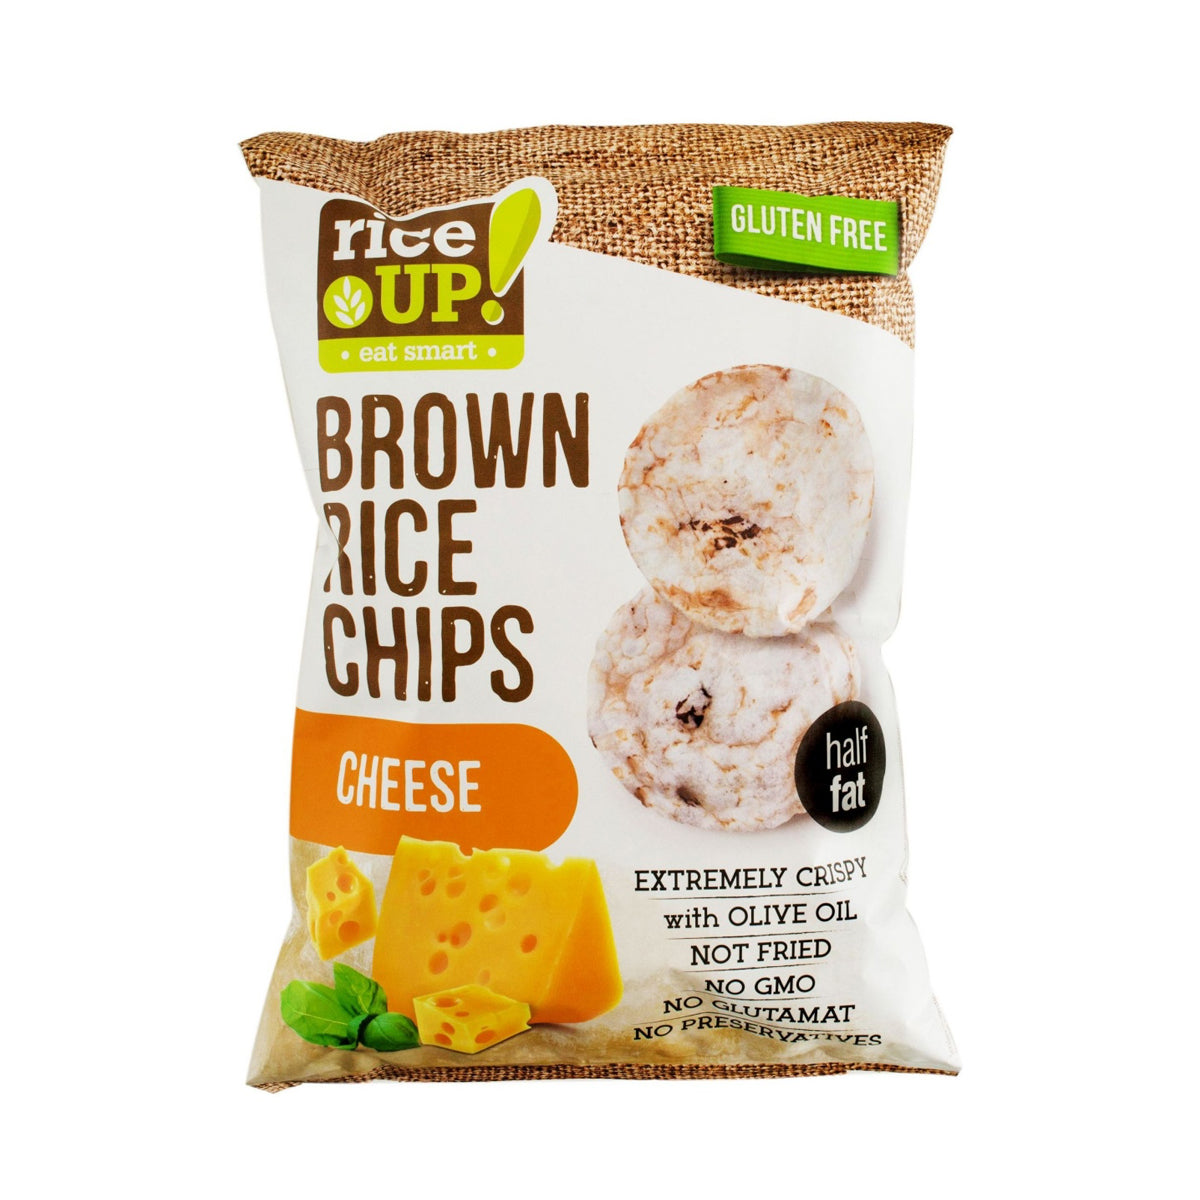 BROWN RICE CHIPS - CHEESE